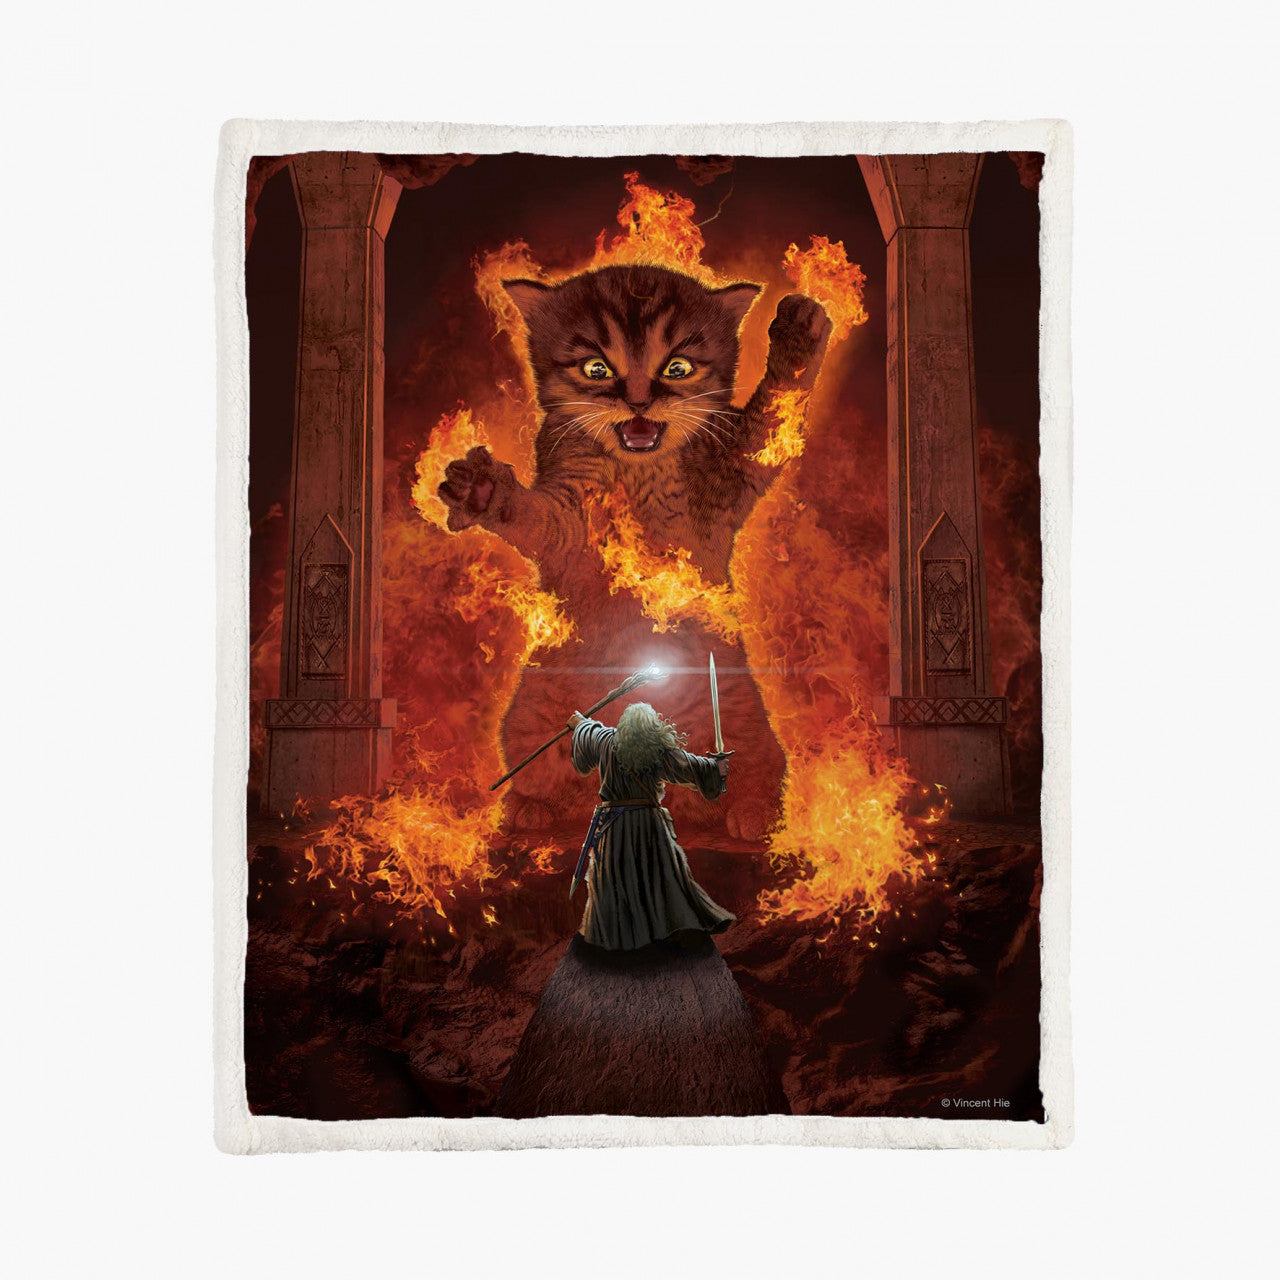 You Shall Not Pass by Vincent Hie, Fleece Blanket